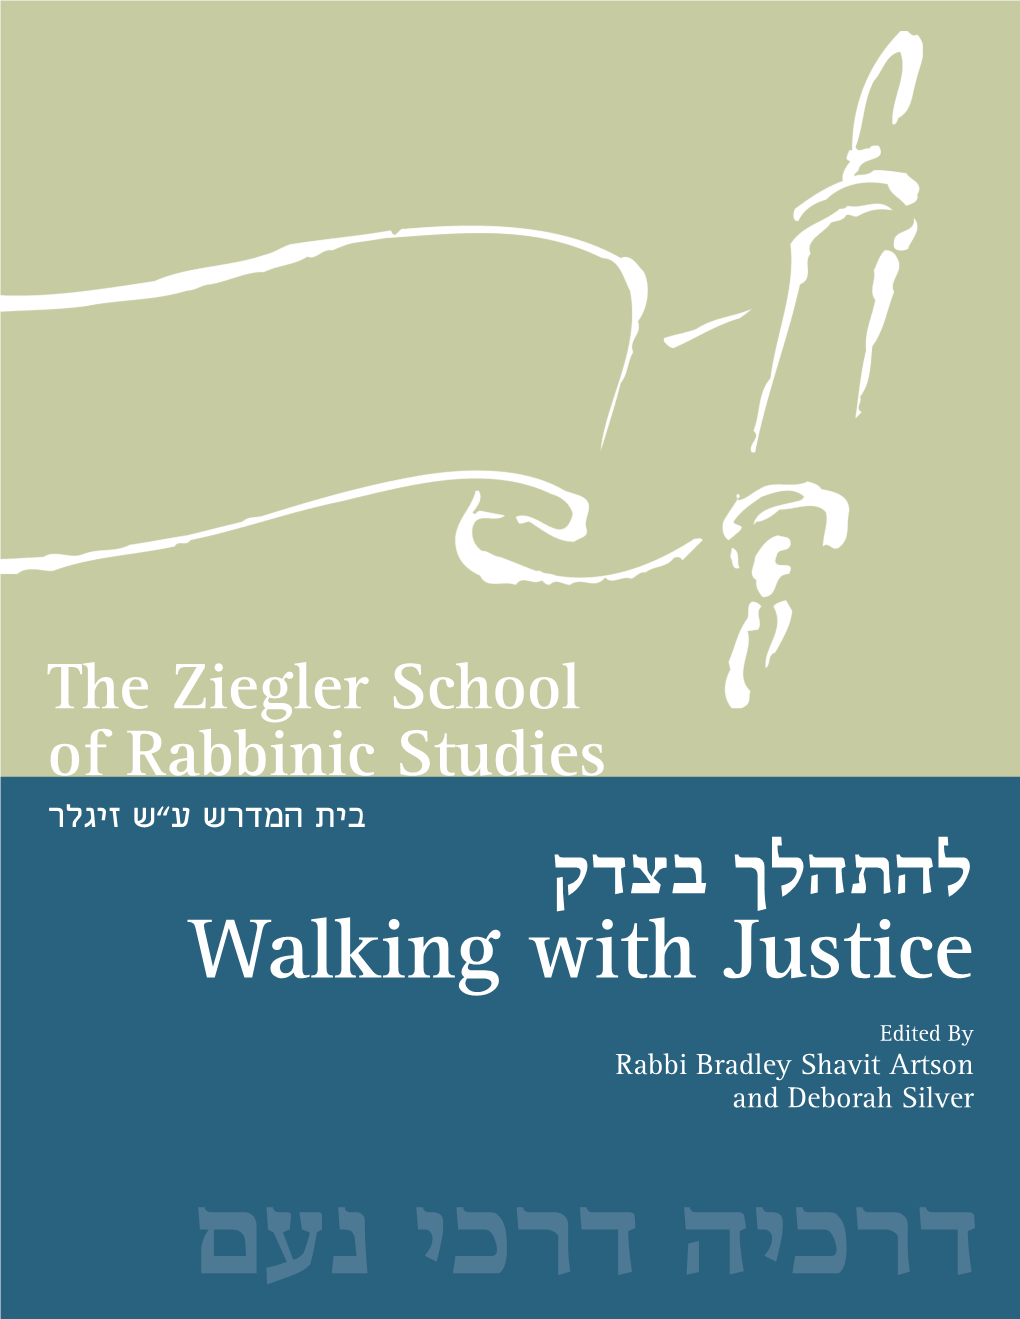 A Torah of Justice - a View from the Right? Dr Steven Bayme